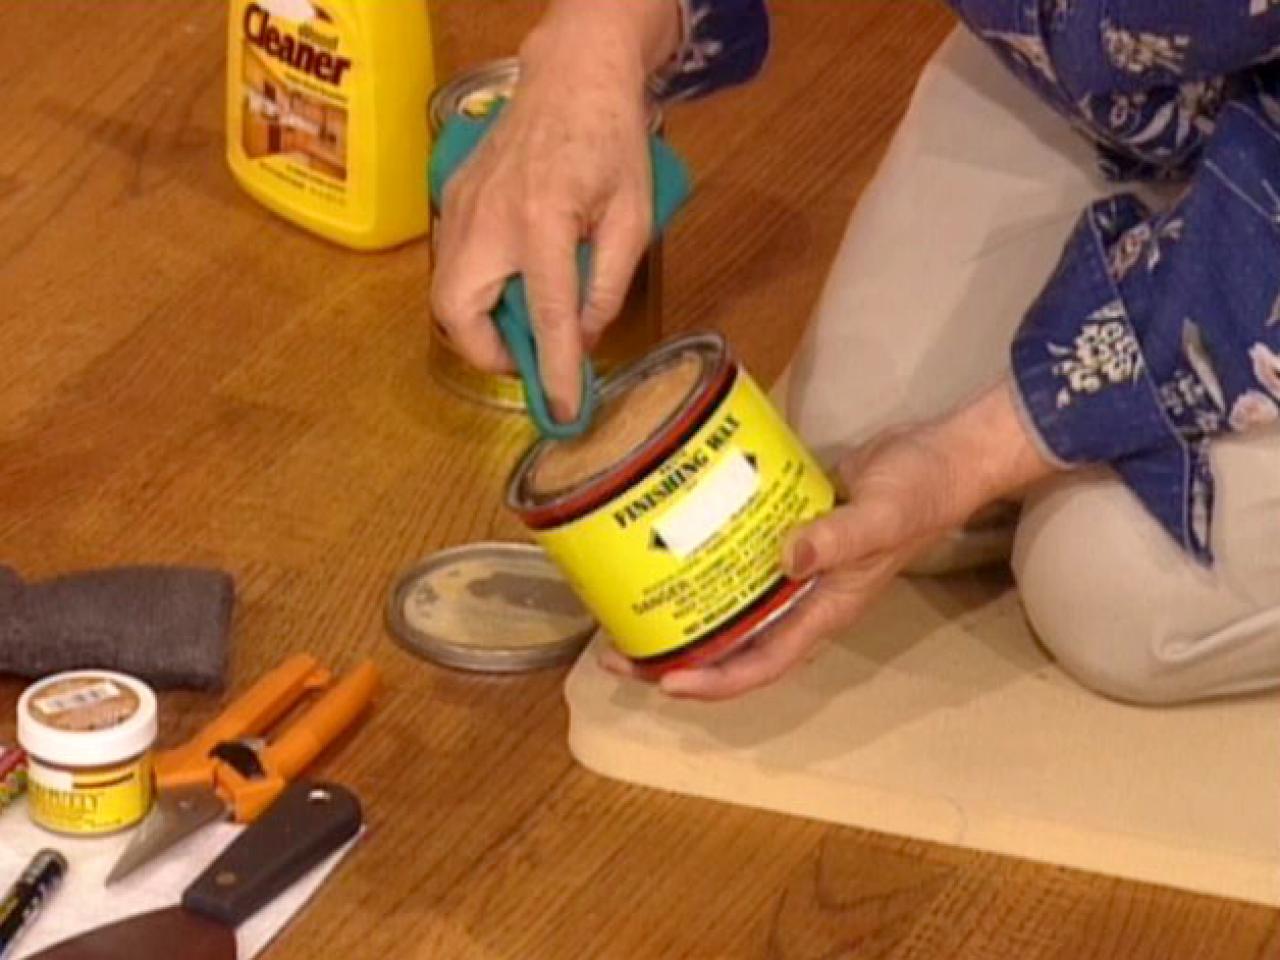 How To Touch Up Wood Floors Tos Diy, Shining Up Hardwood Floors